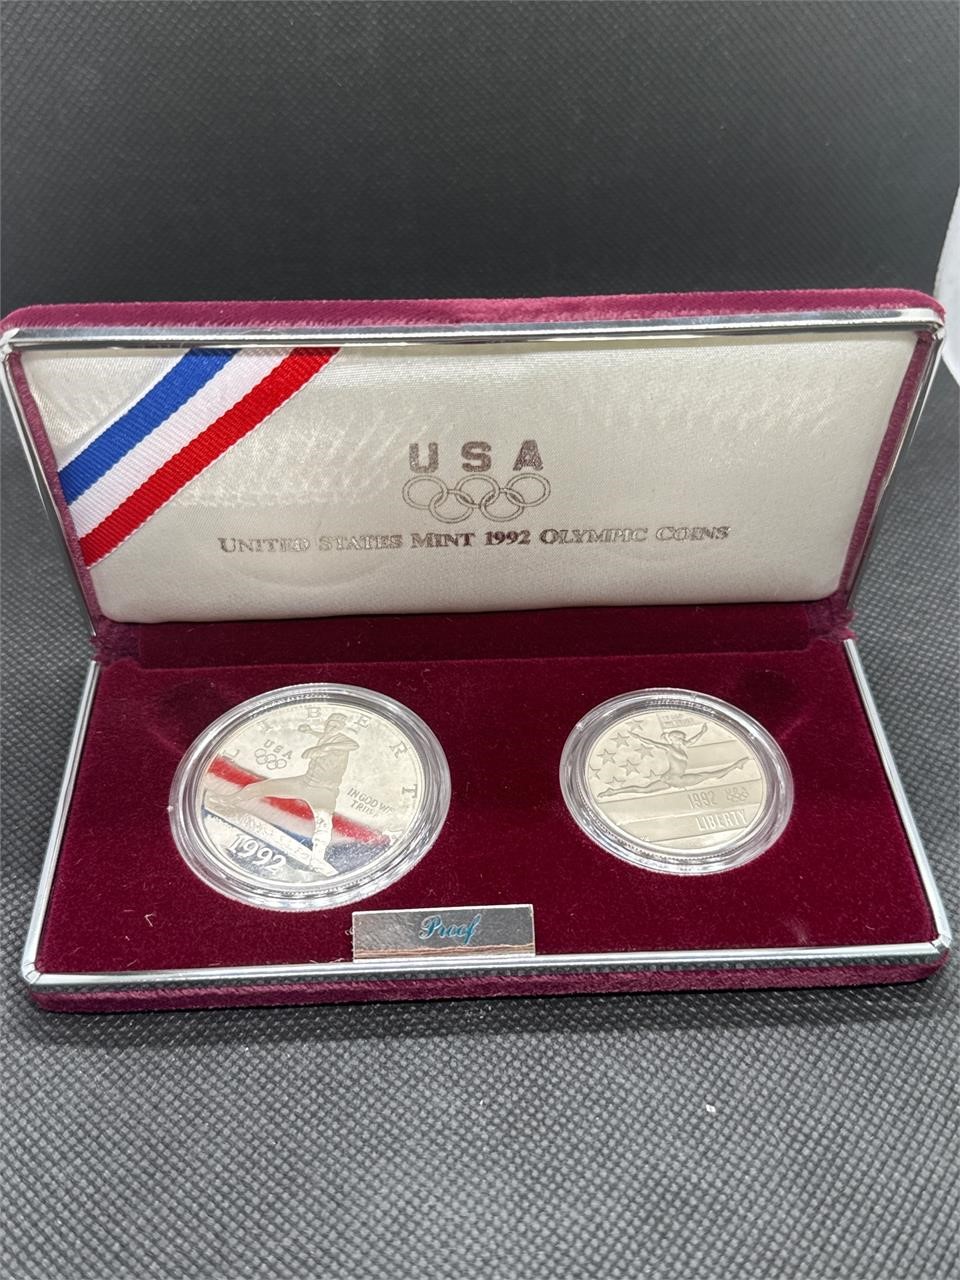 1992 US MINT OLYMPIC COINS .90 SILVER DOLLAR SET